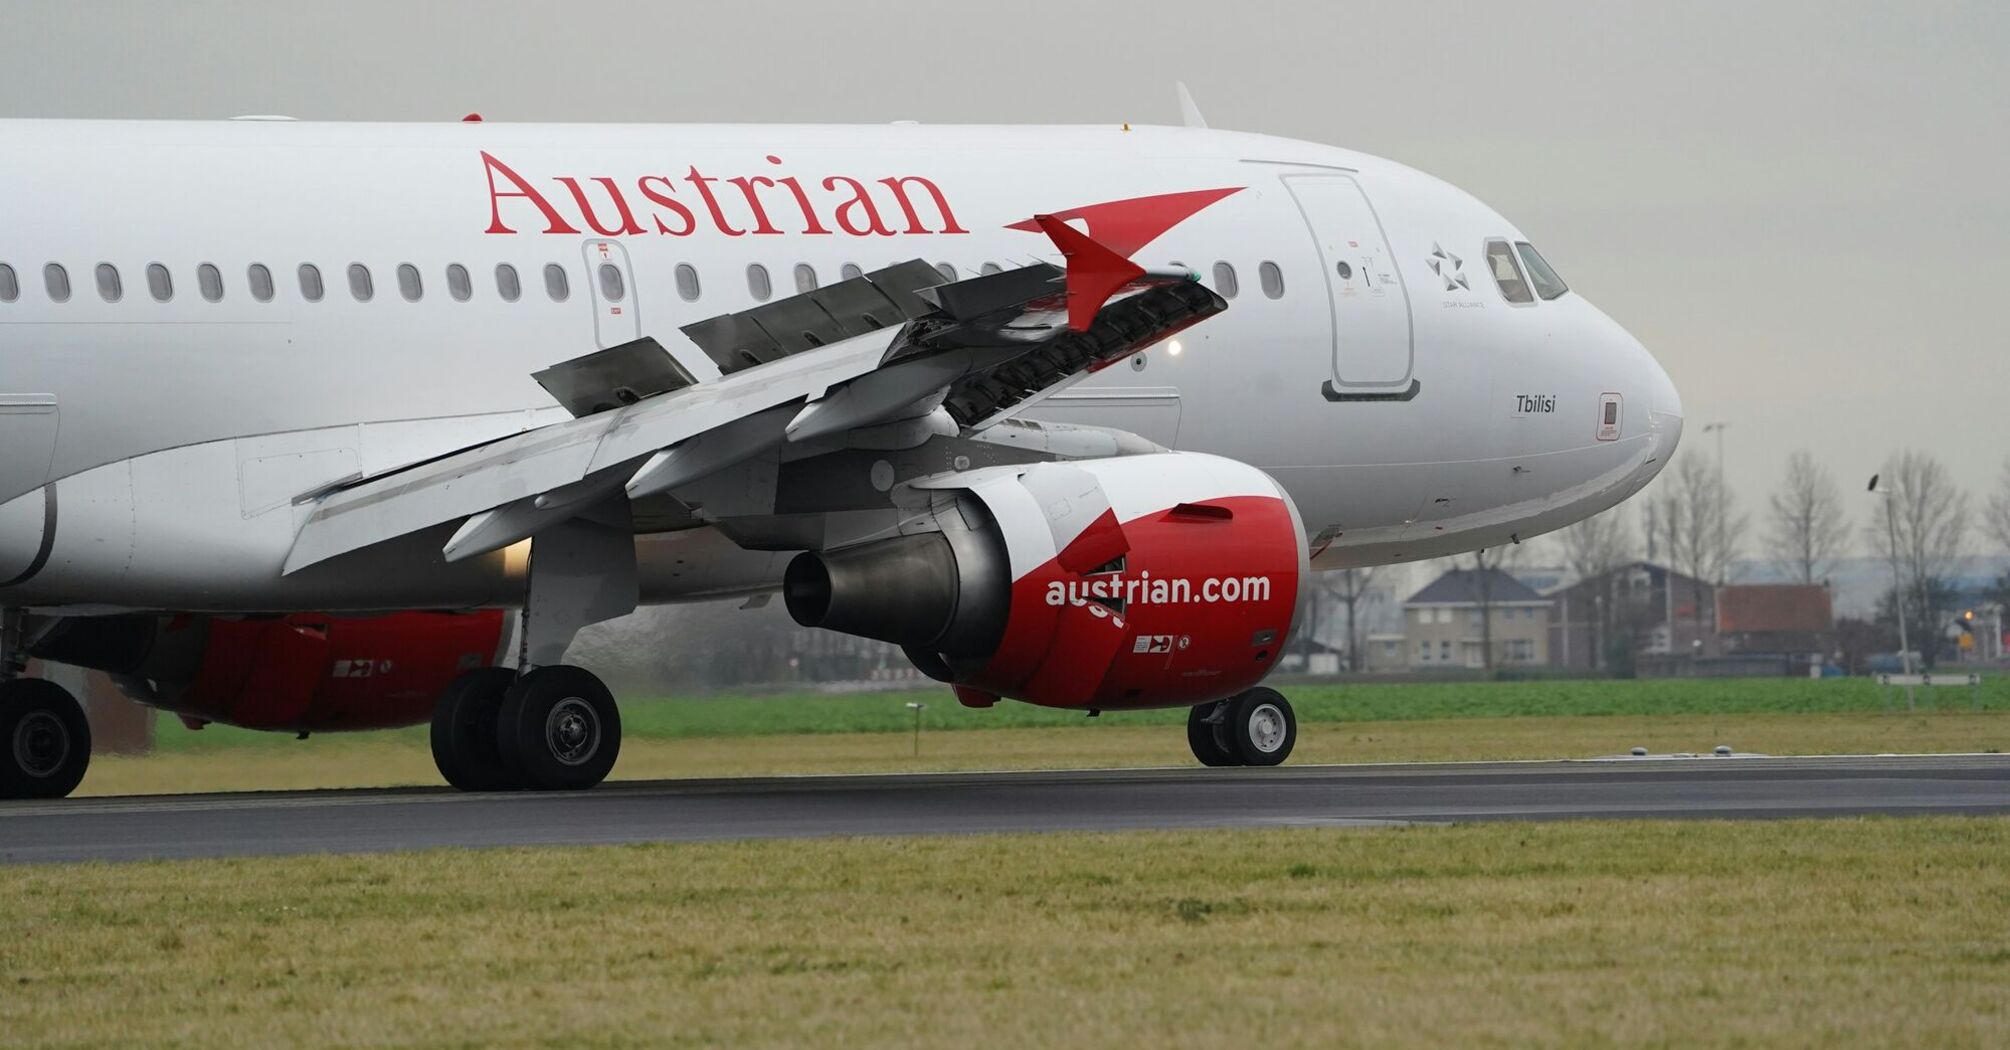 Austrian Airlines airplane taking off from Schiphol's airport runway